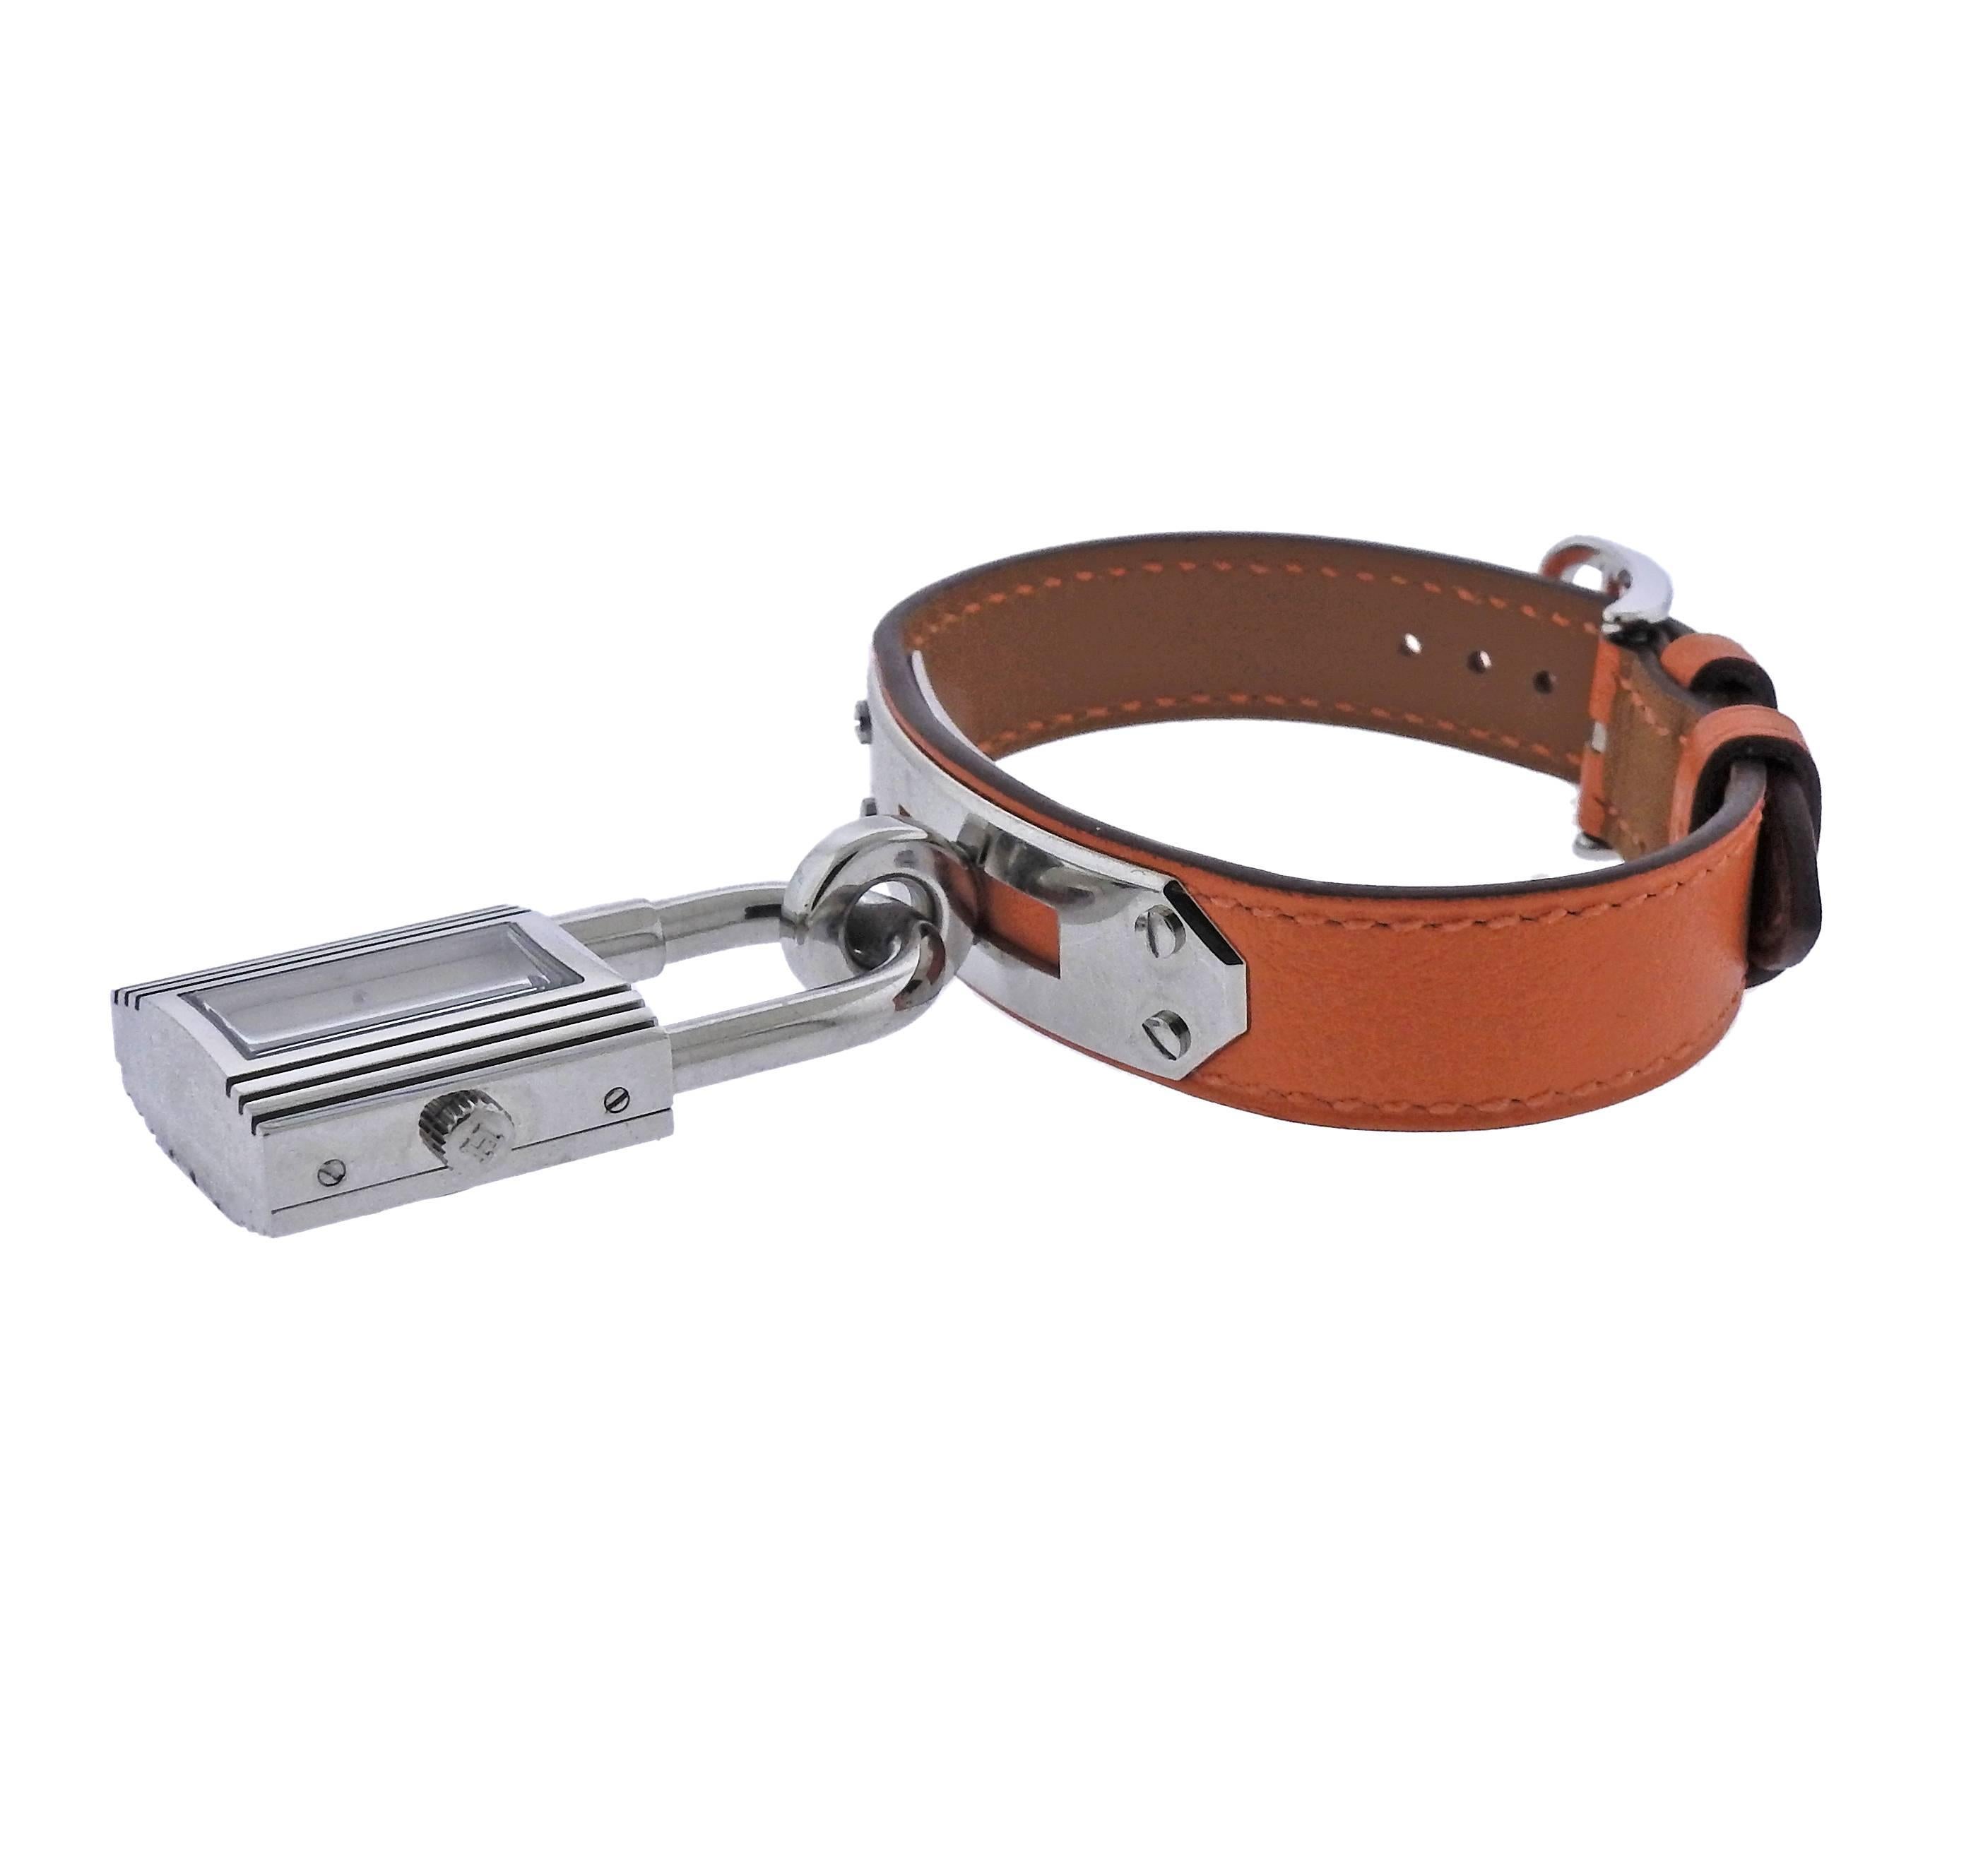 Stainless steel Kelly charm watch bracelet, crafted by Hermes.  Bracelet is 7